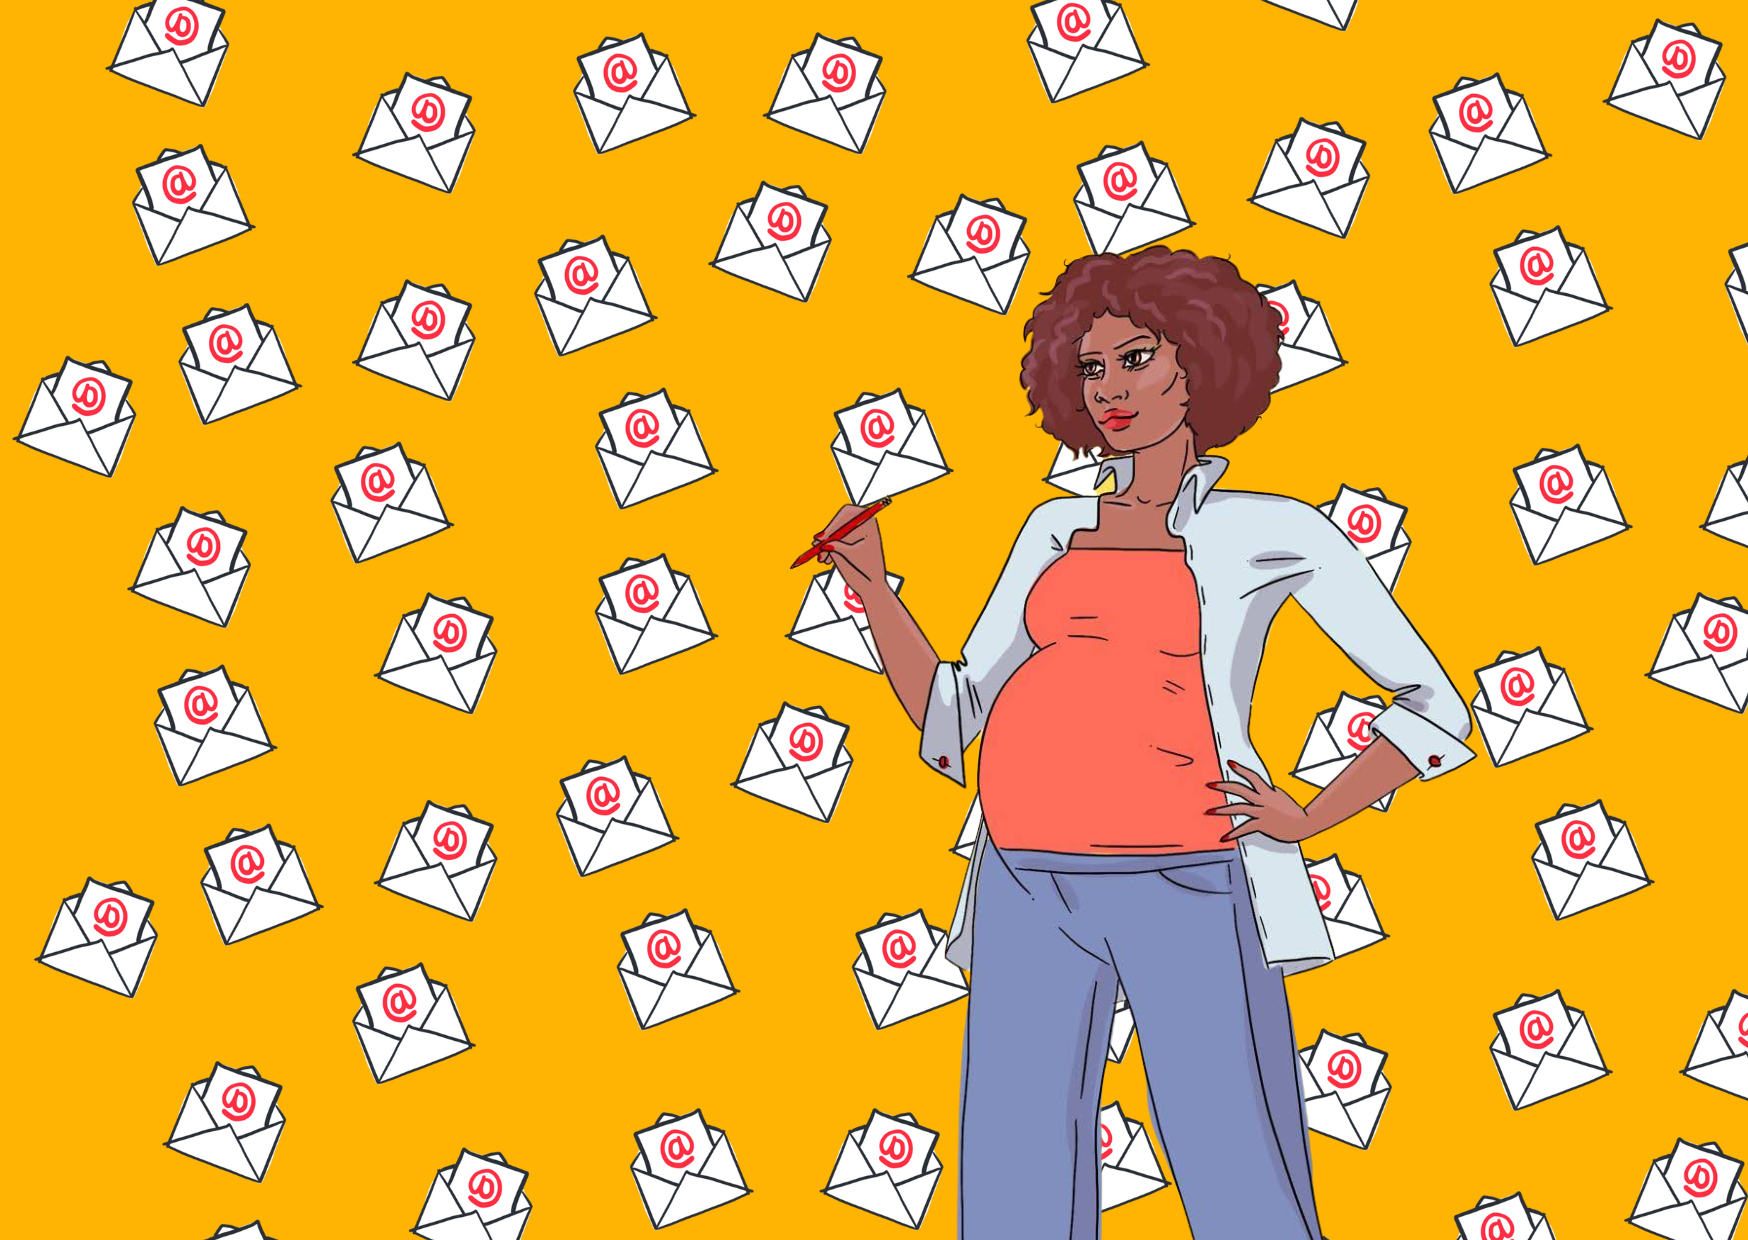 Alt text: Illustration of pregnant woman holding a pen surrounded by letters in envelopes